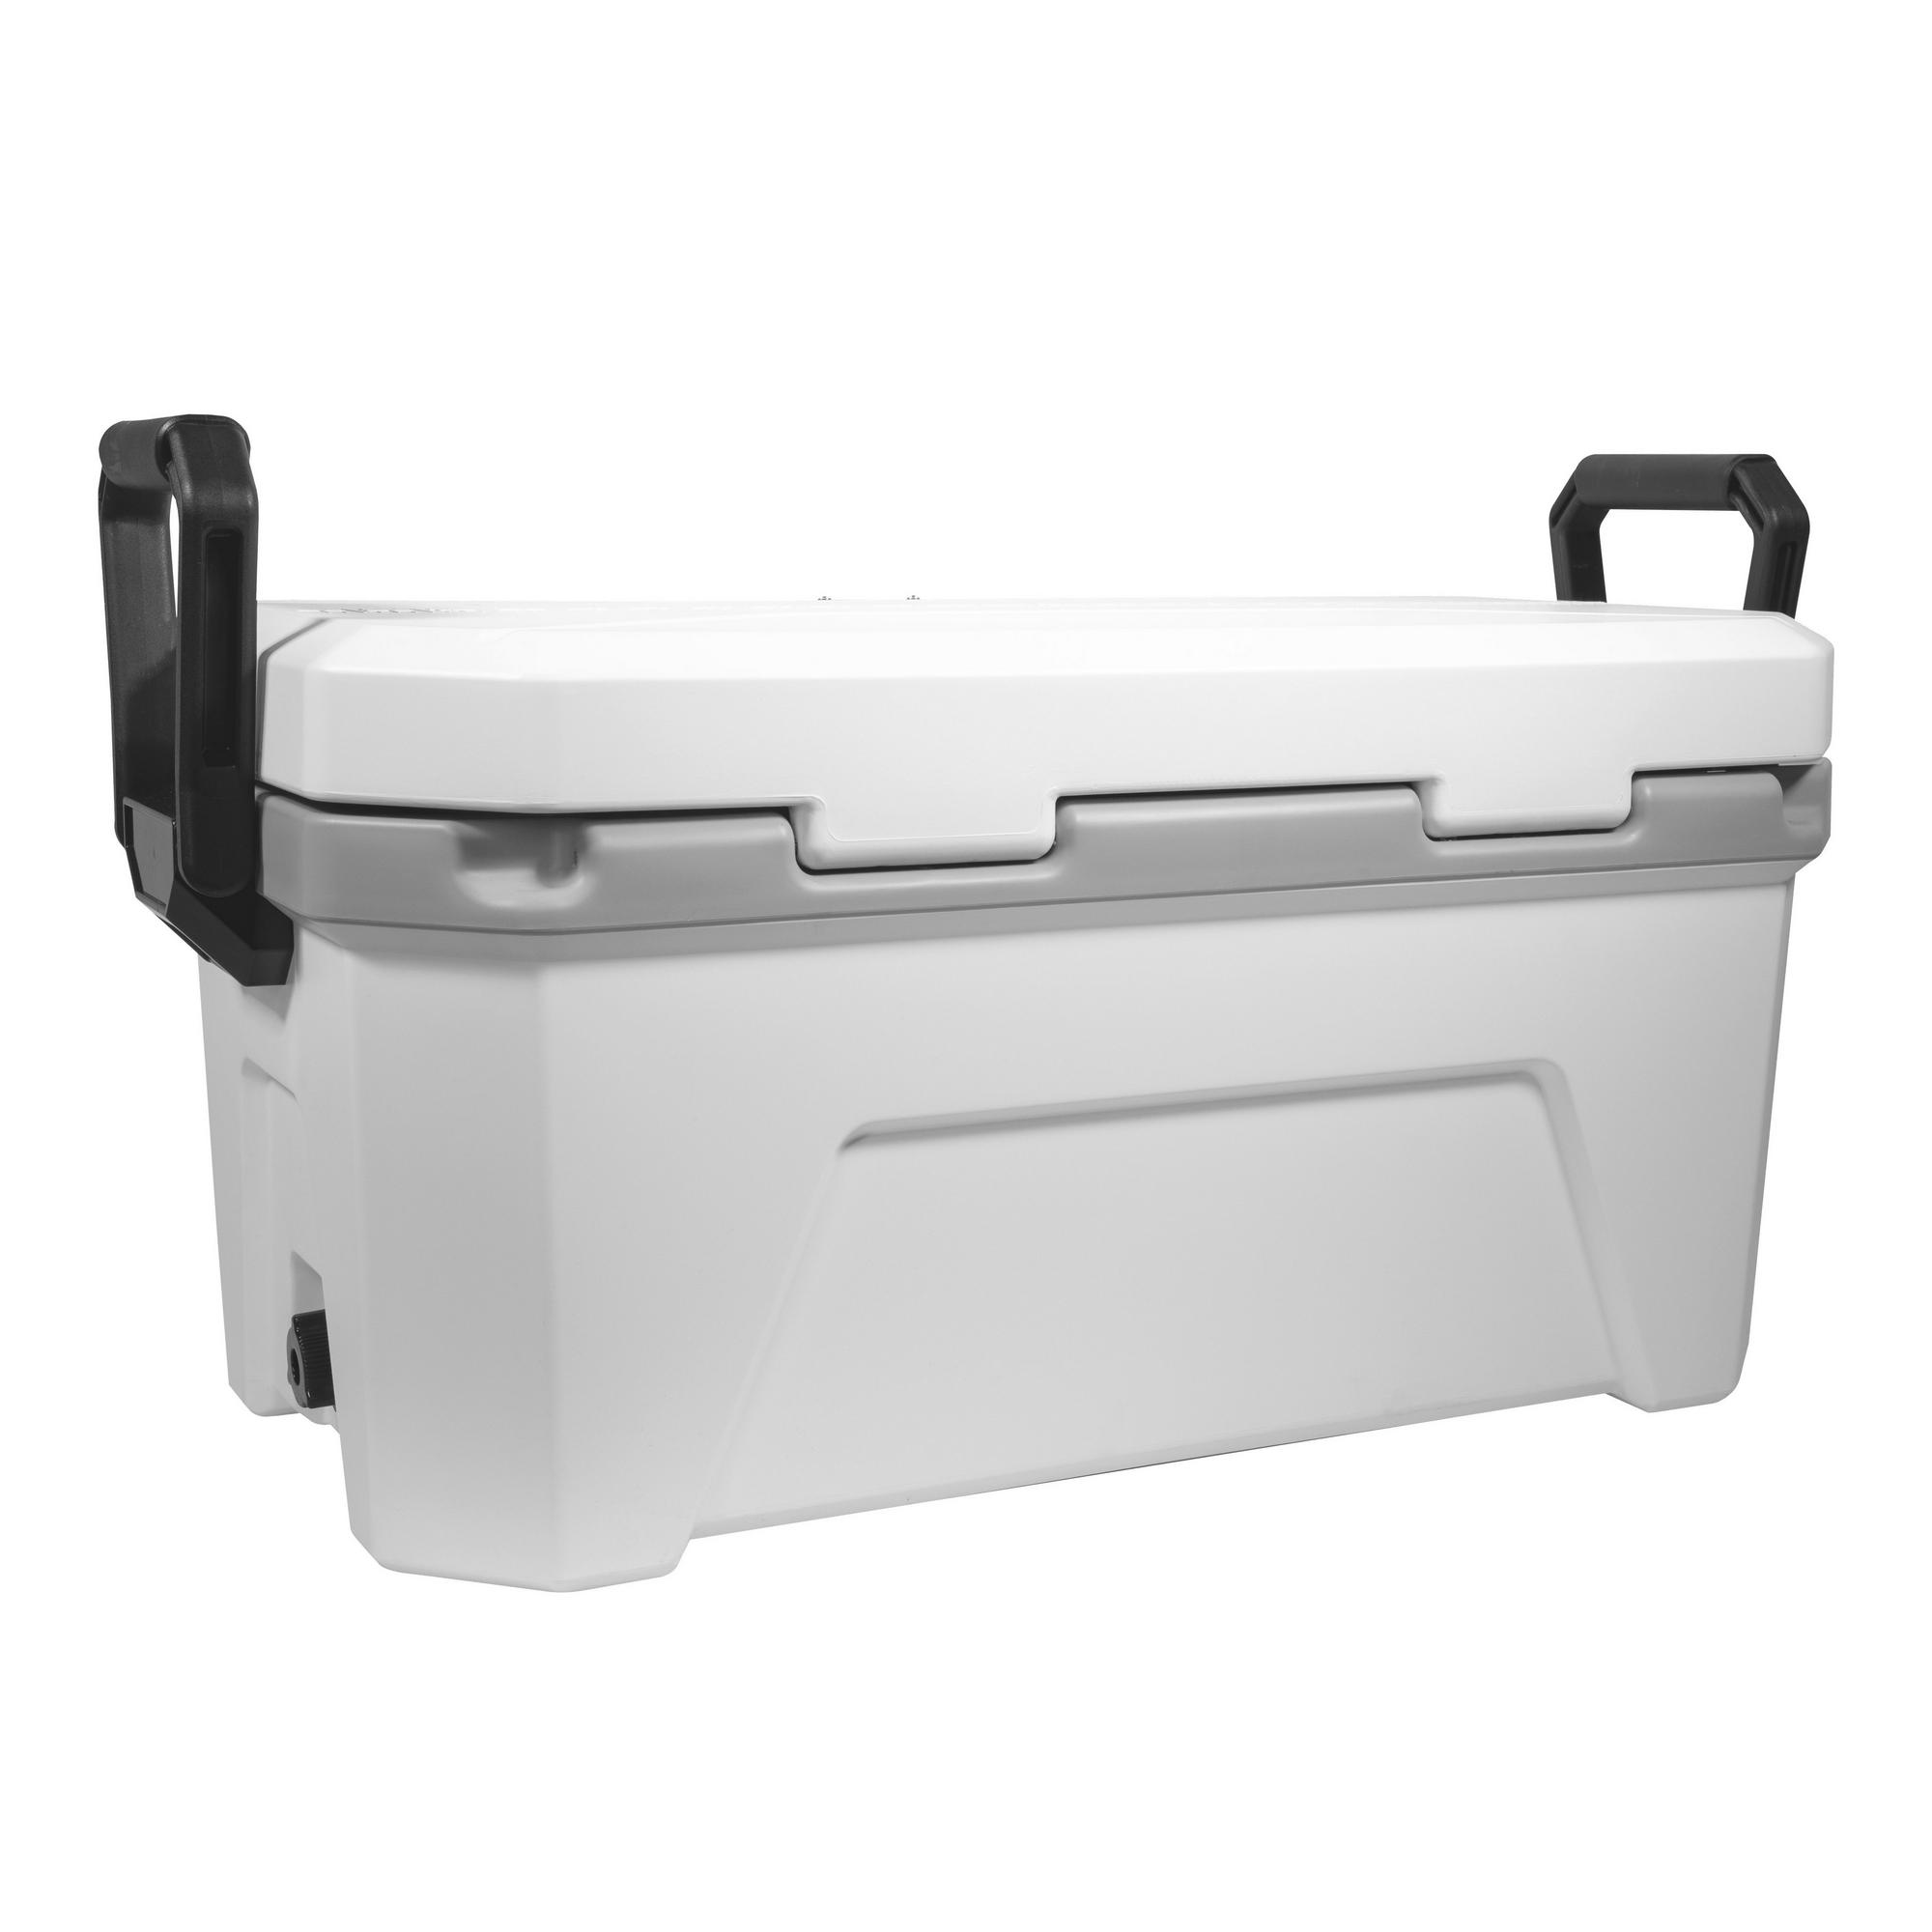 Plano Frost Hard Cooler 30L - Ice White